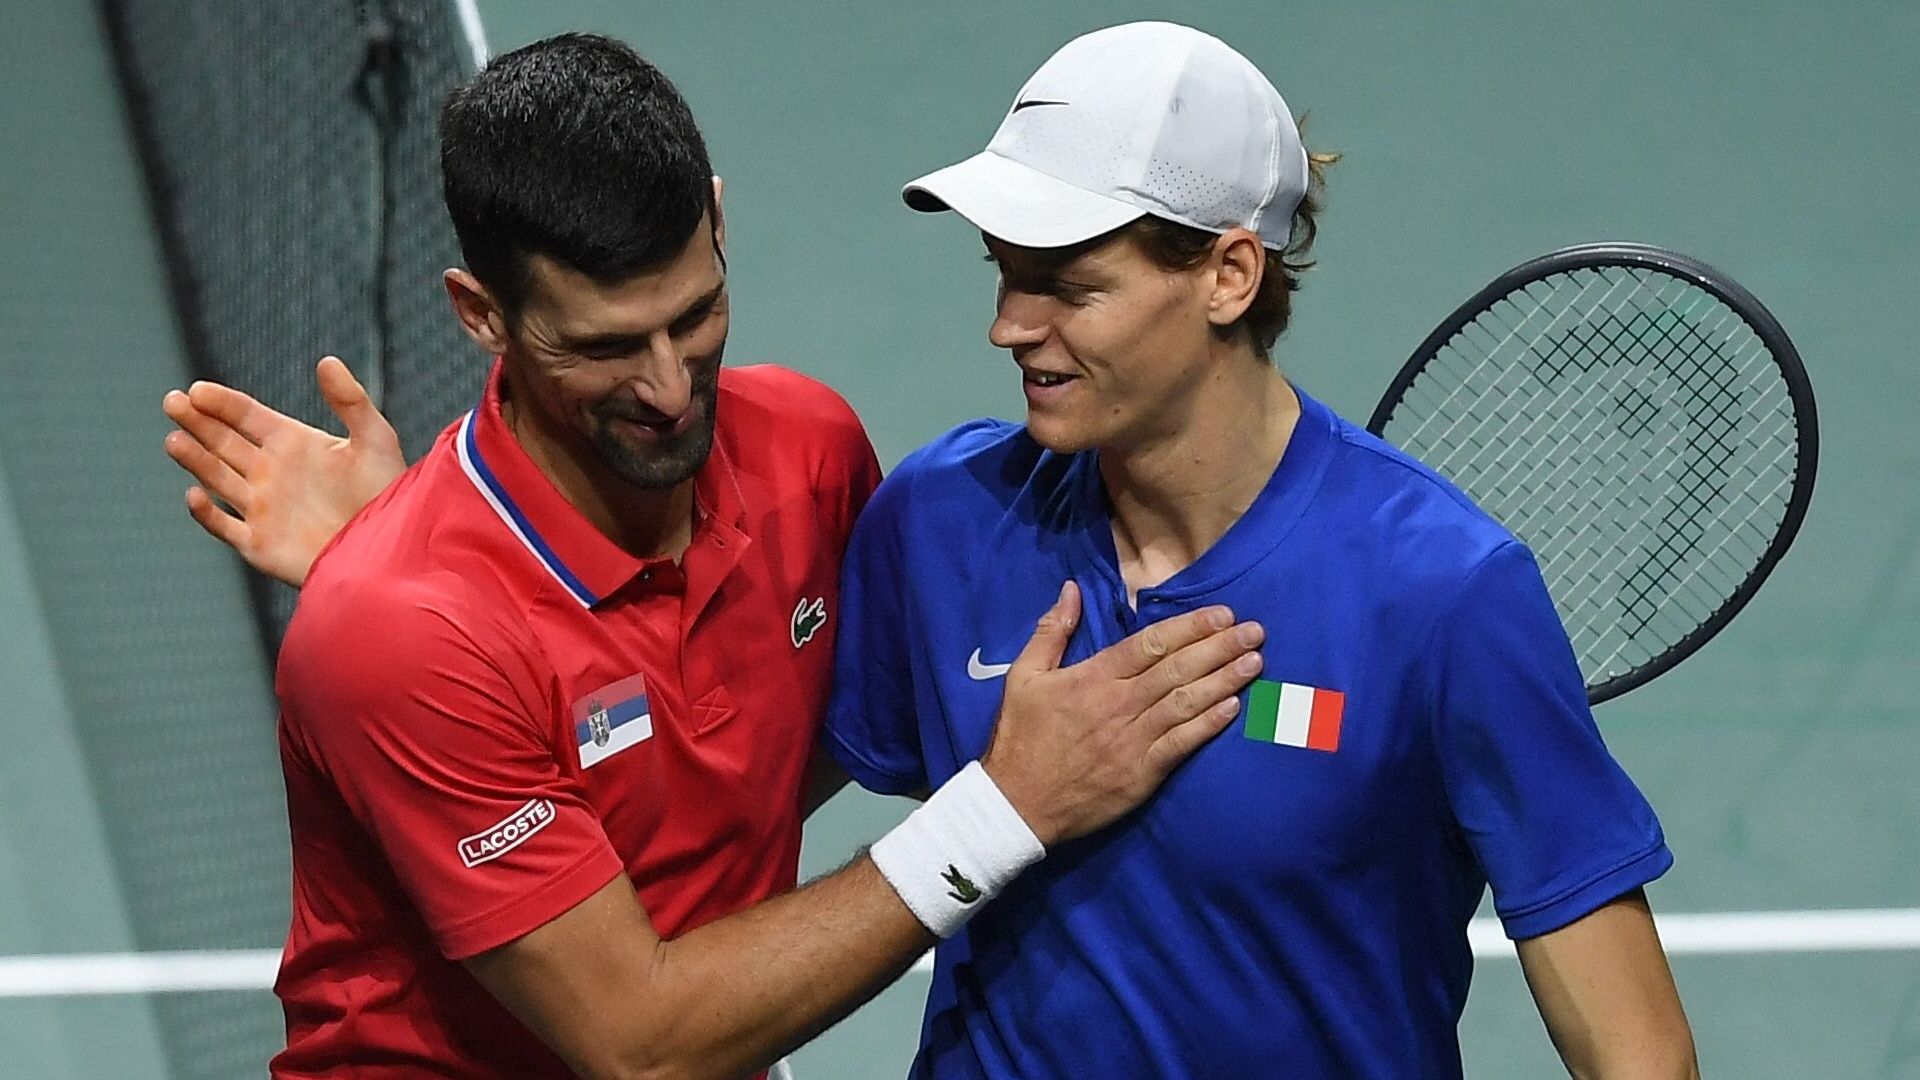 Davis Cup: Italy advances to final against Australia after Djokovic’s win over Serbia